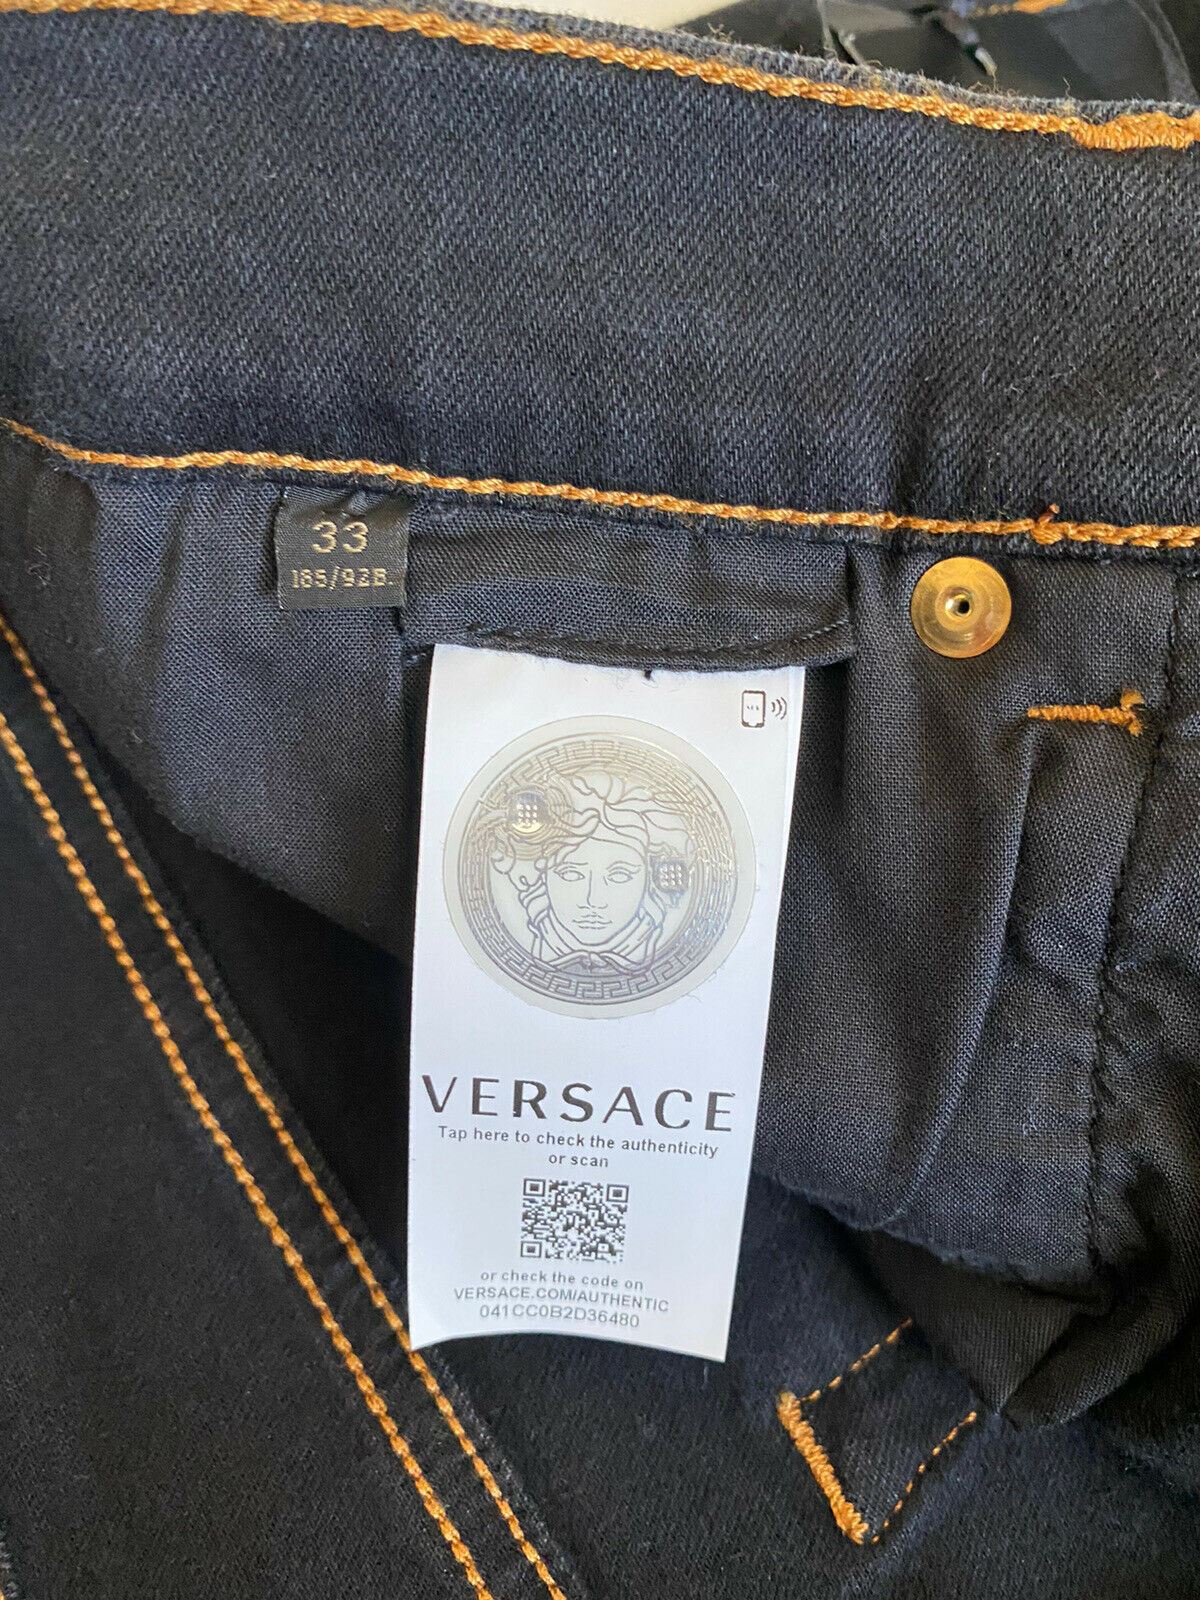 NWT $450 Versace Men's Denim Black Jeans Size 33 US A84998S Made